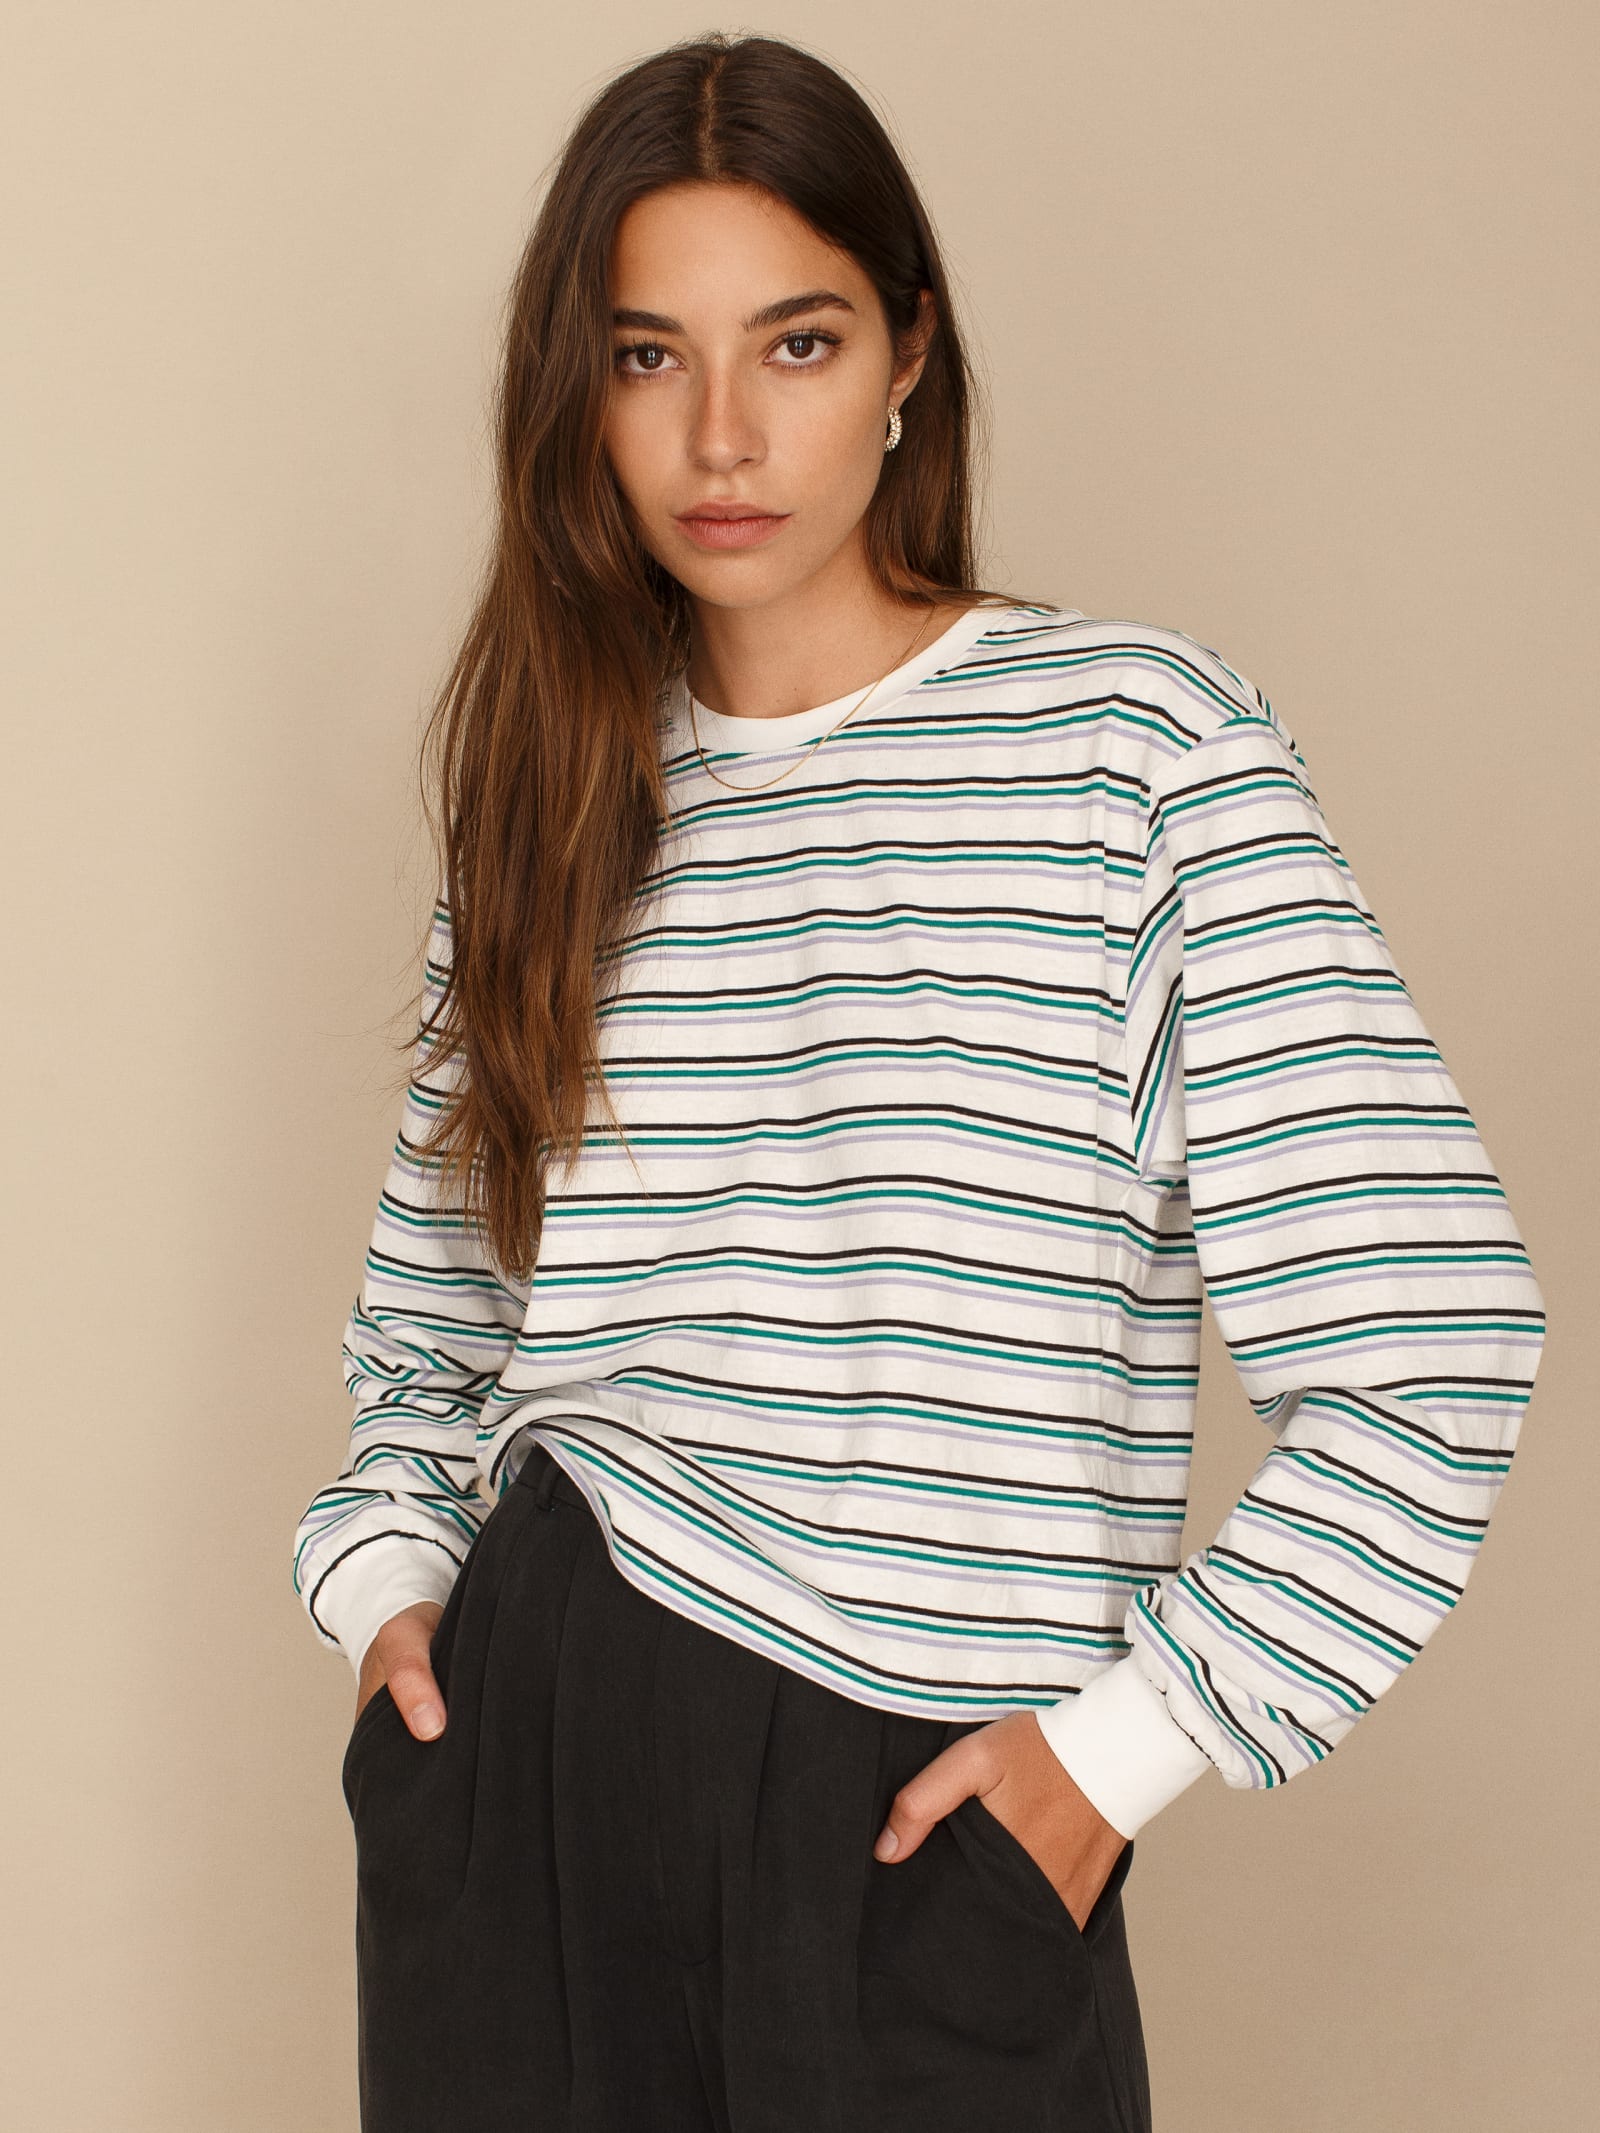 Lou Striped Tee | Reformation